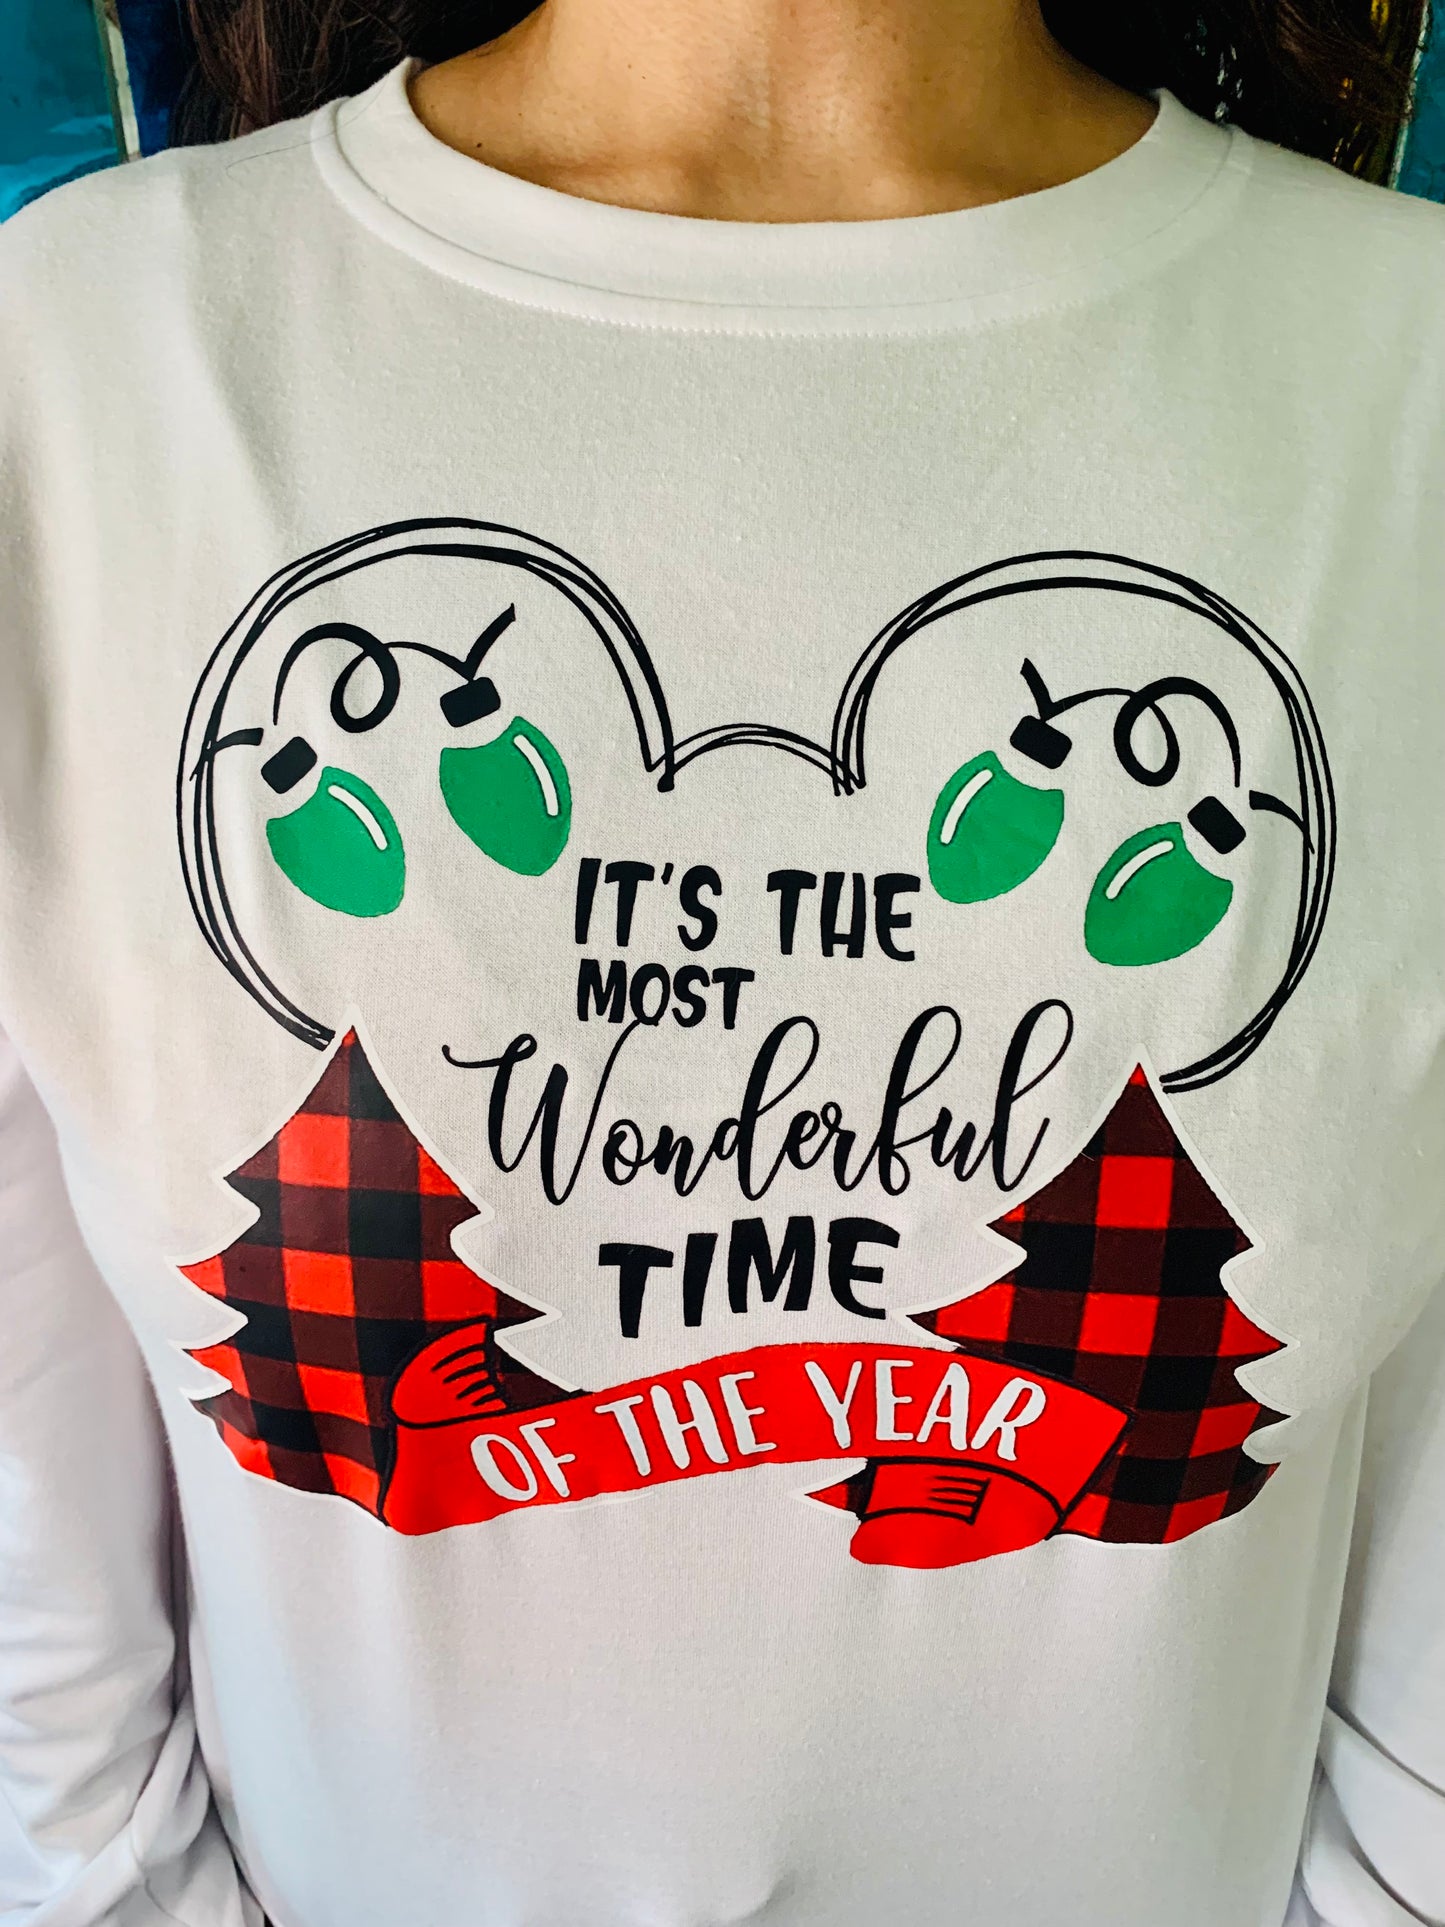 The most wonderful time of the year top